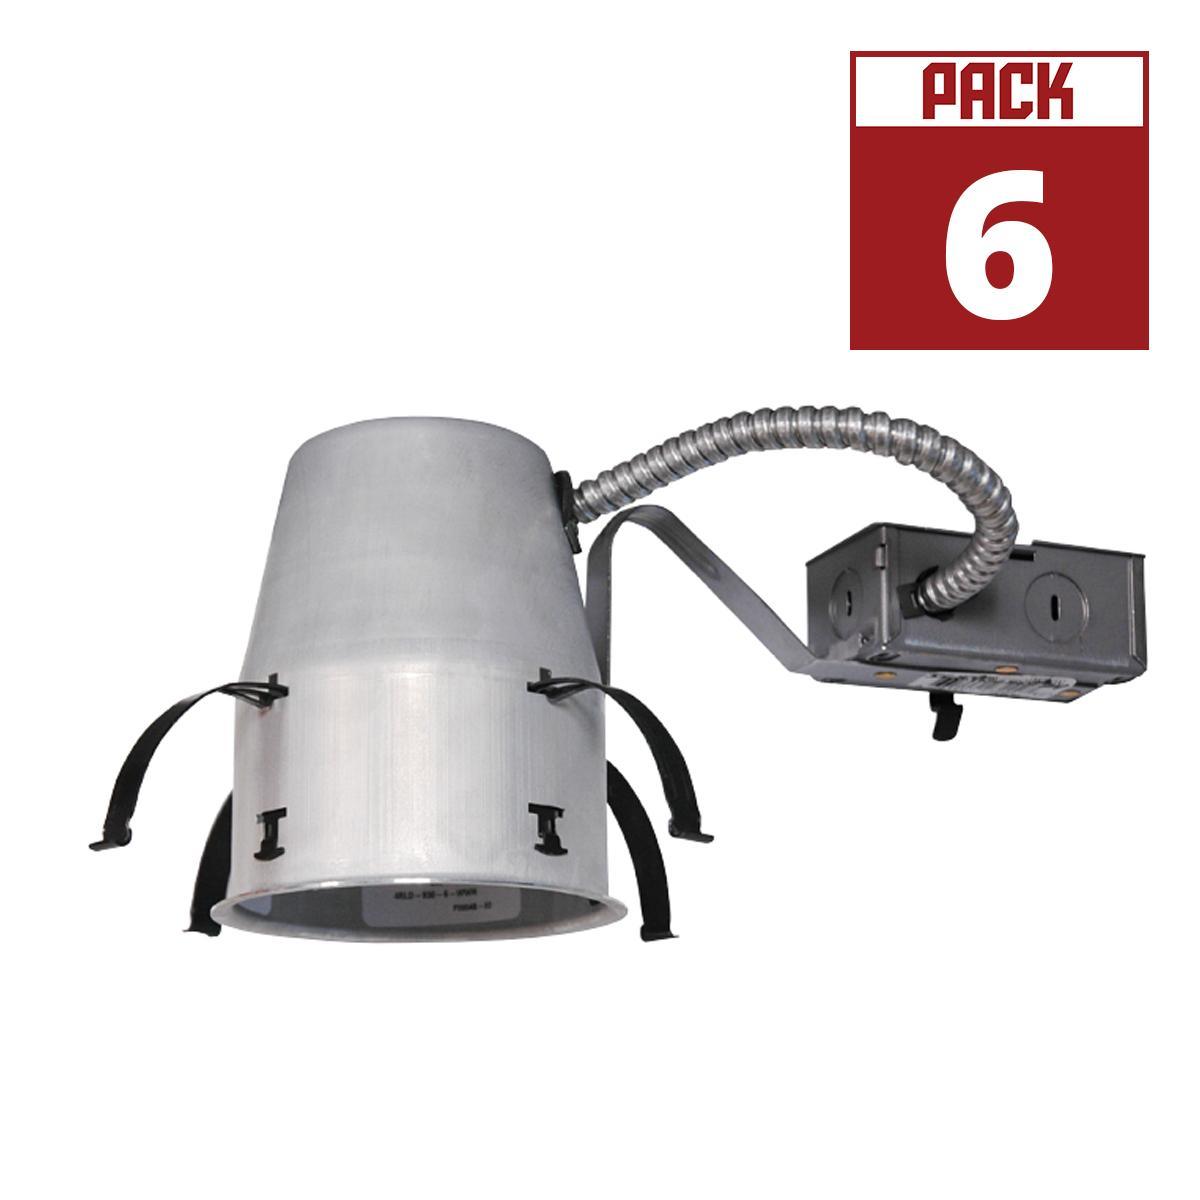 Juno Quick Connect, LED Remodel Housing, 4 in, IC Rated, 120V, Pack Of 6 - Bees Lighting